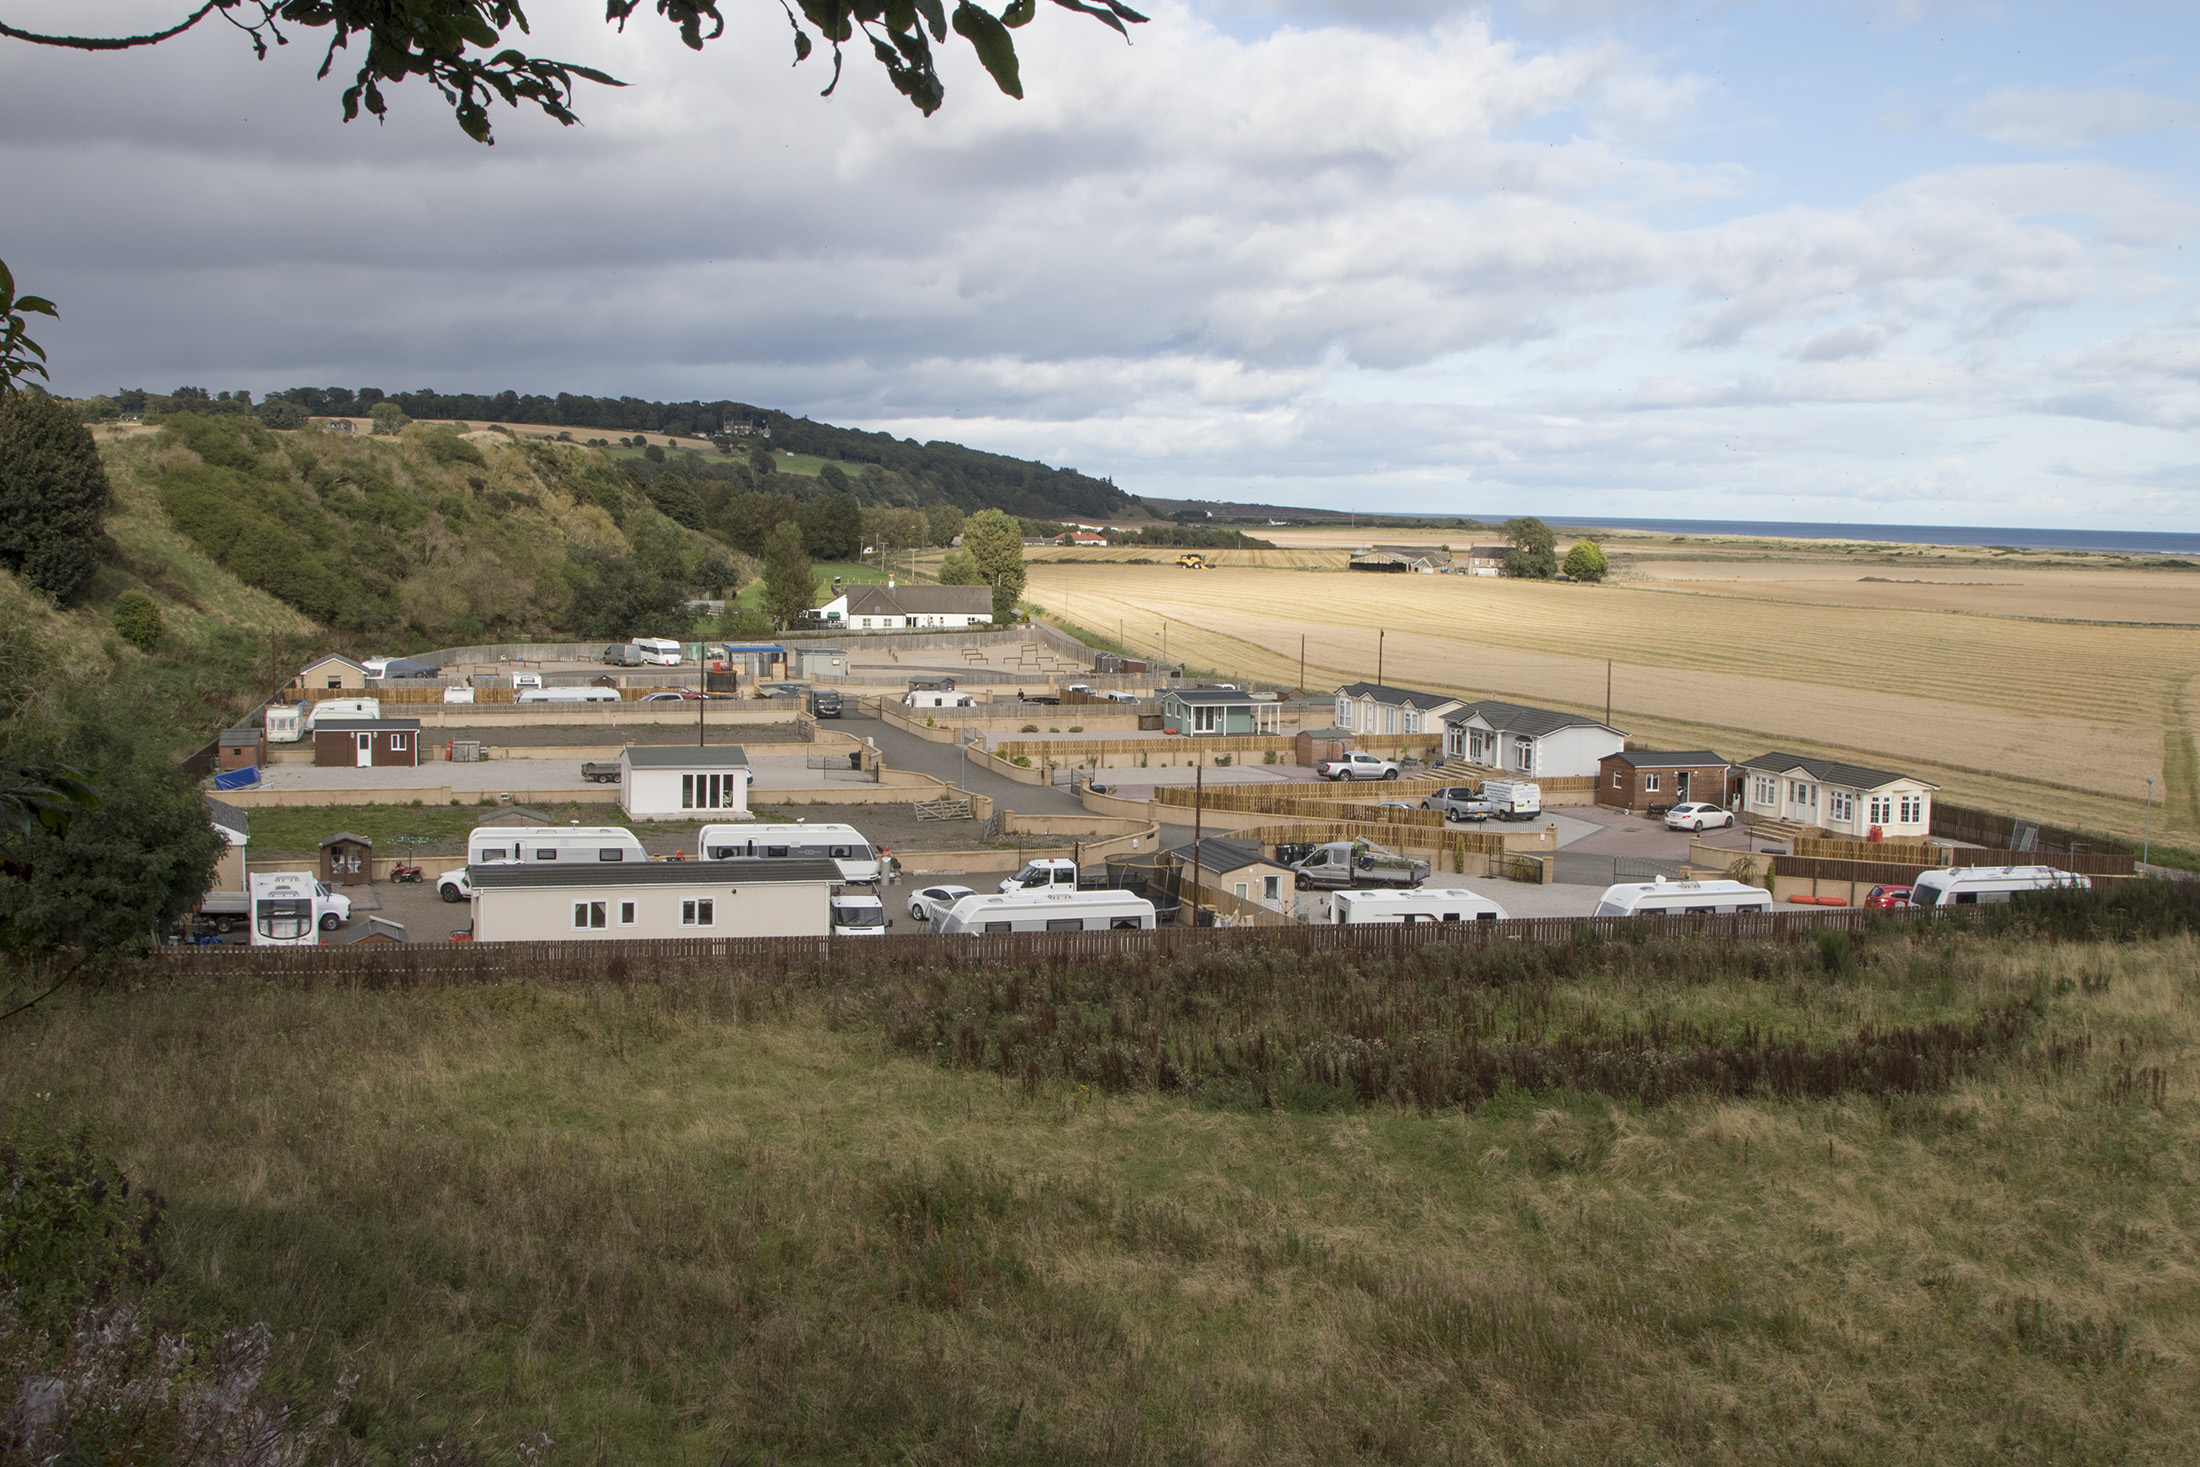 The Travellers site at St Cyrus.